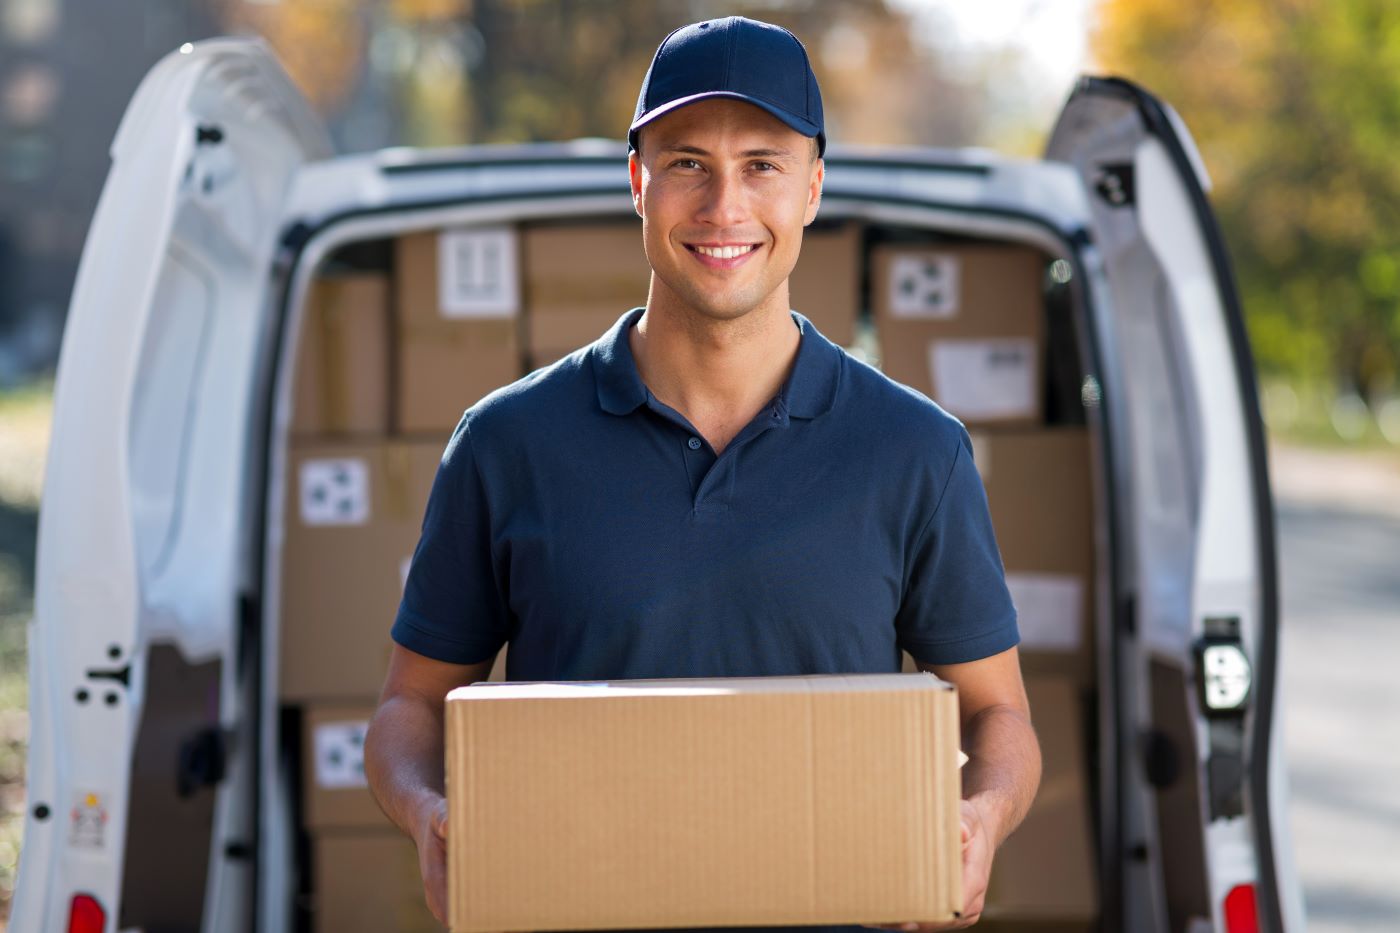 Delivery worker holding a package 